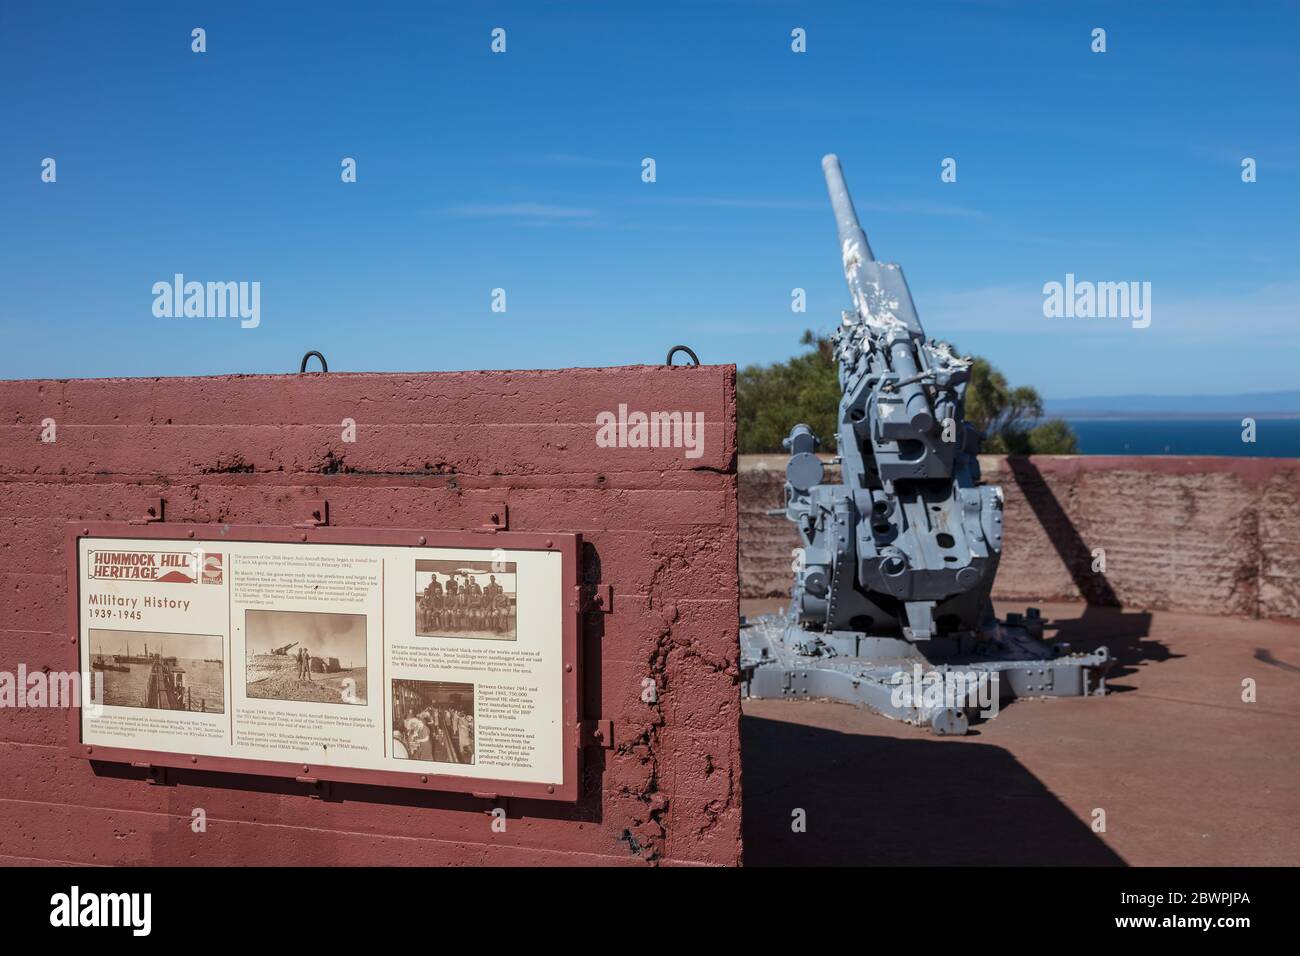 Whyalla South Australia November 17th 2019 : Plaque detailing the history of the 3.7 inch anti aircraft gun mounted on Hummock Hill in Whyalla Stock Photo